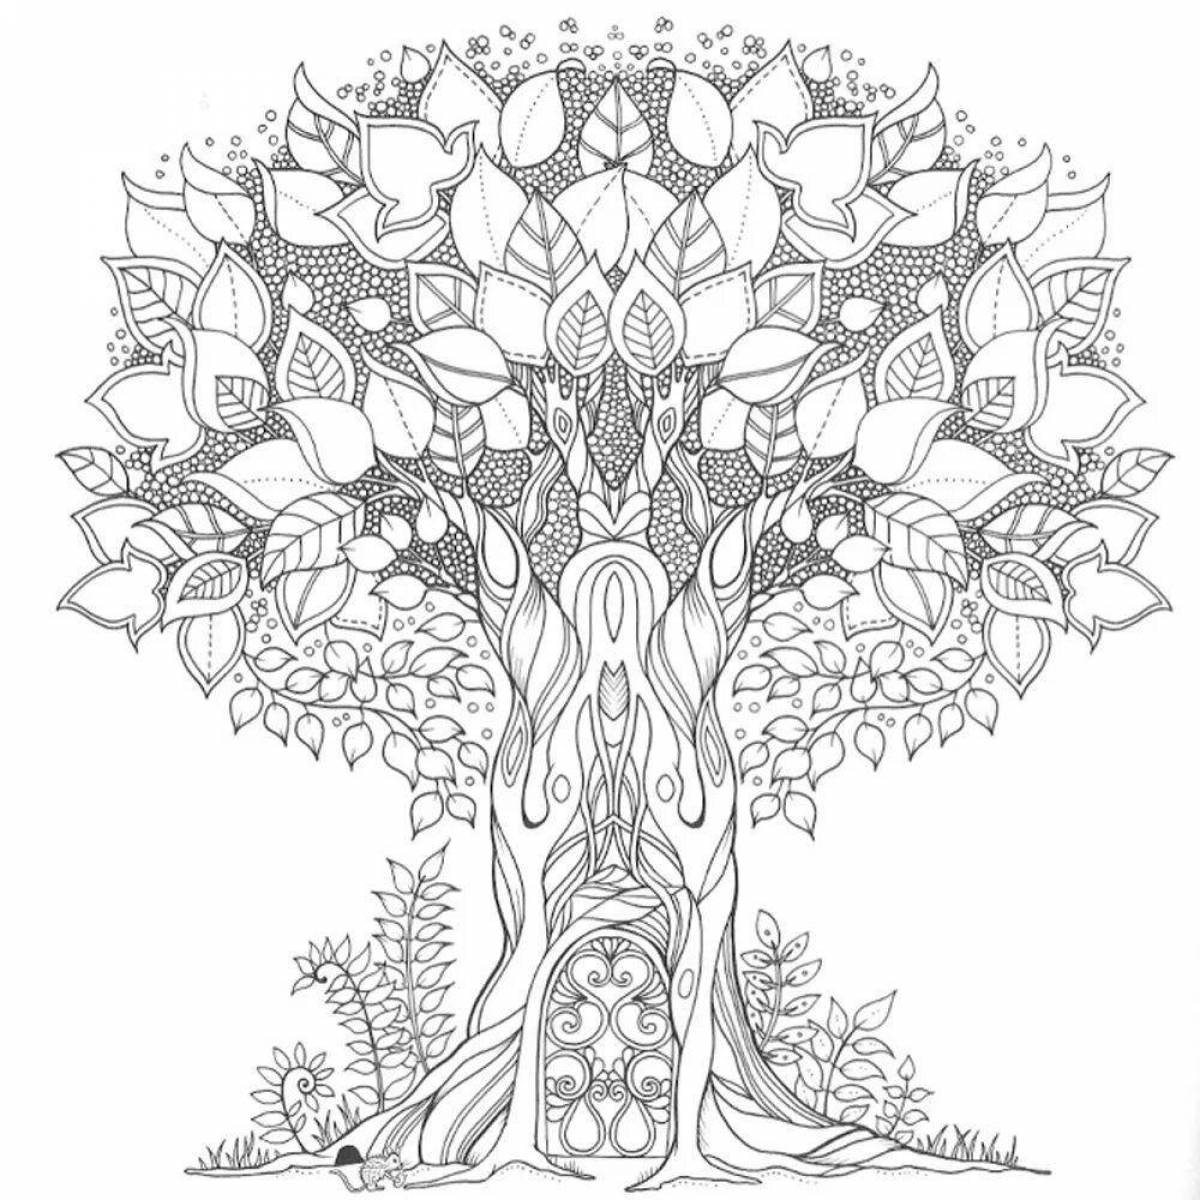 Glorious tree of life coloring page